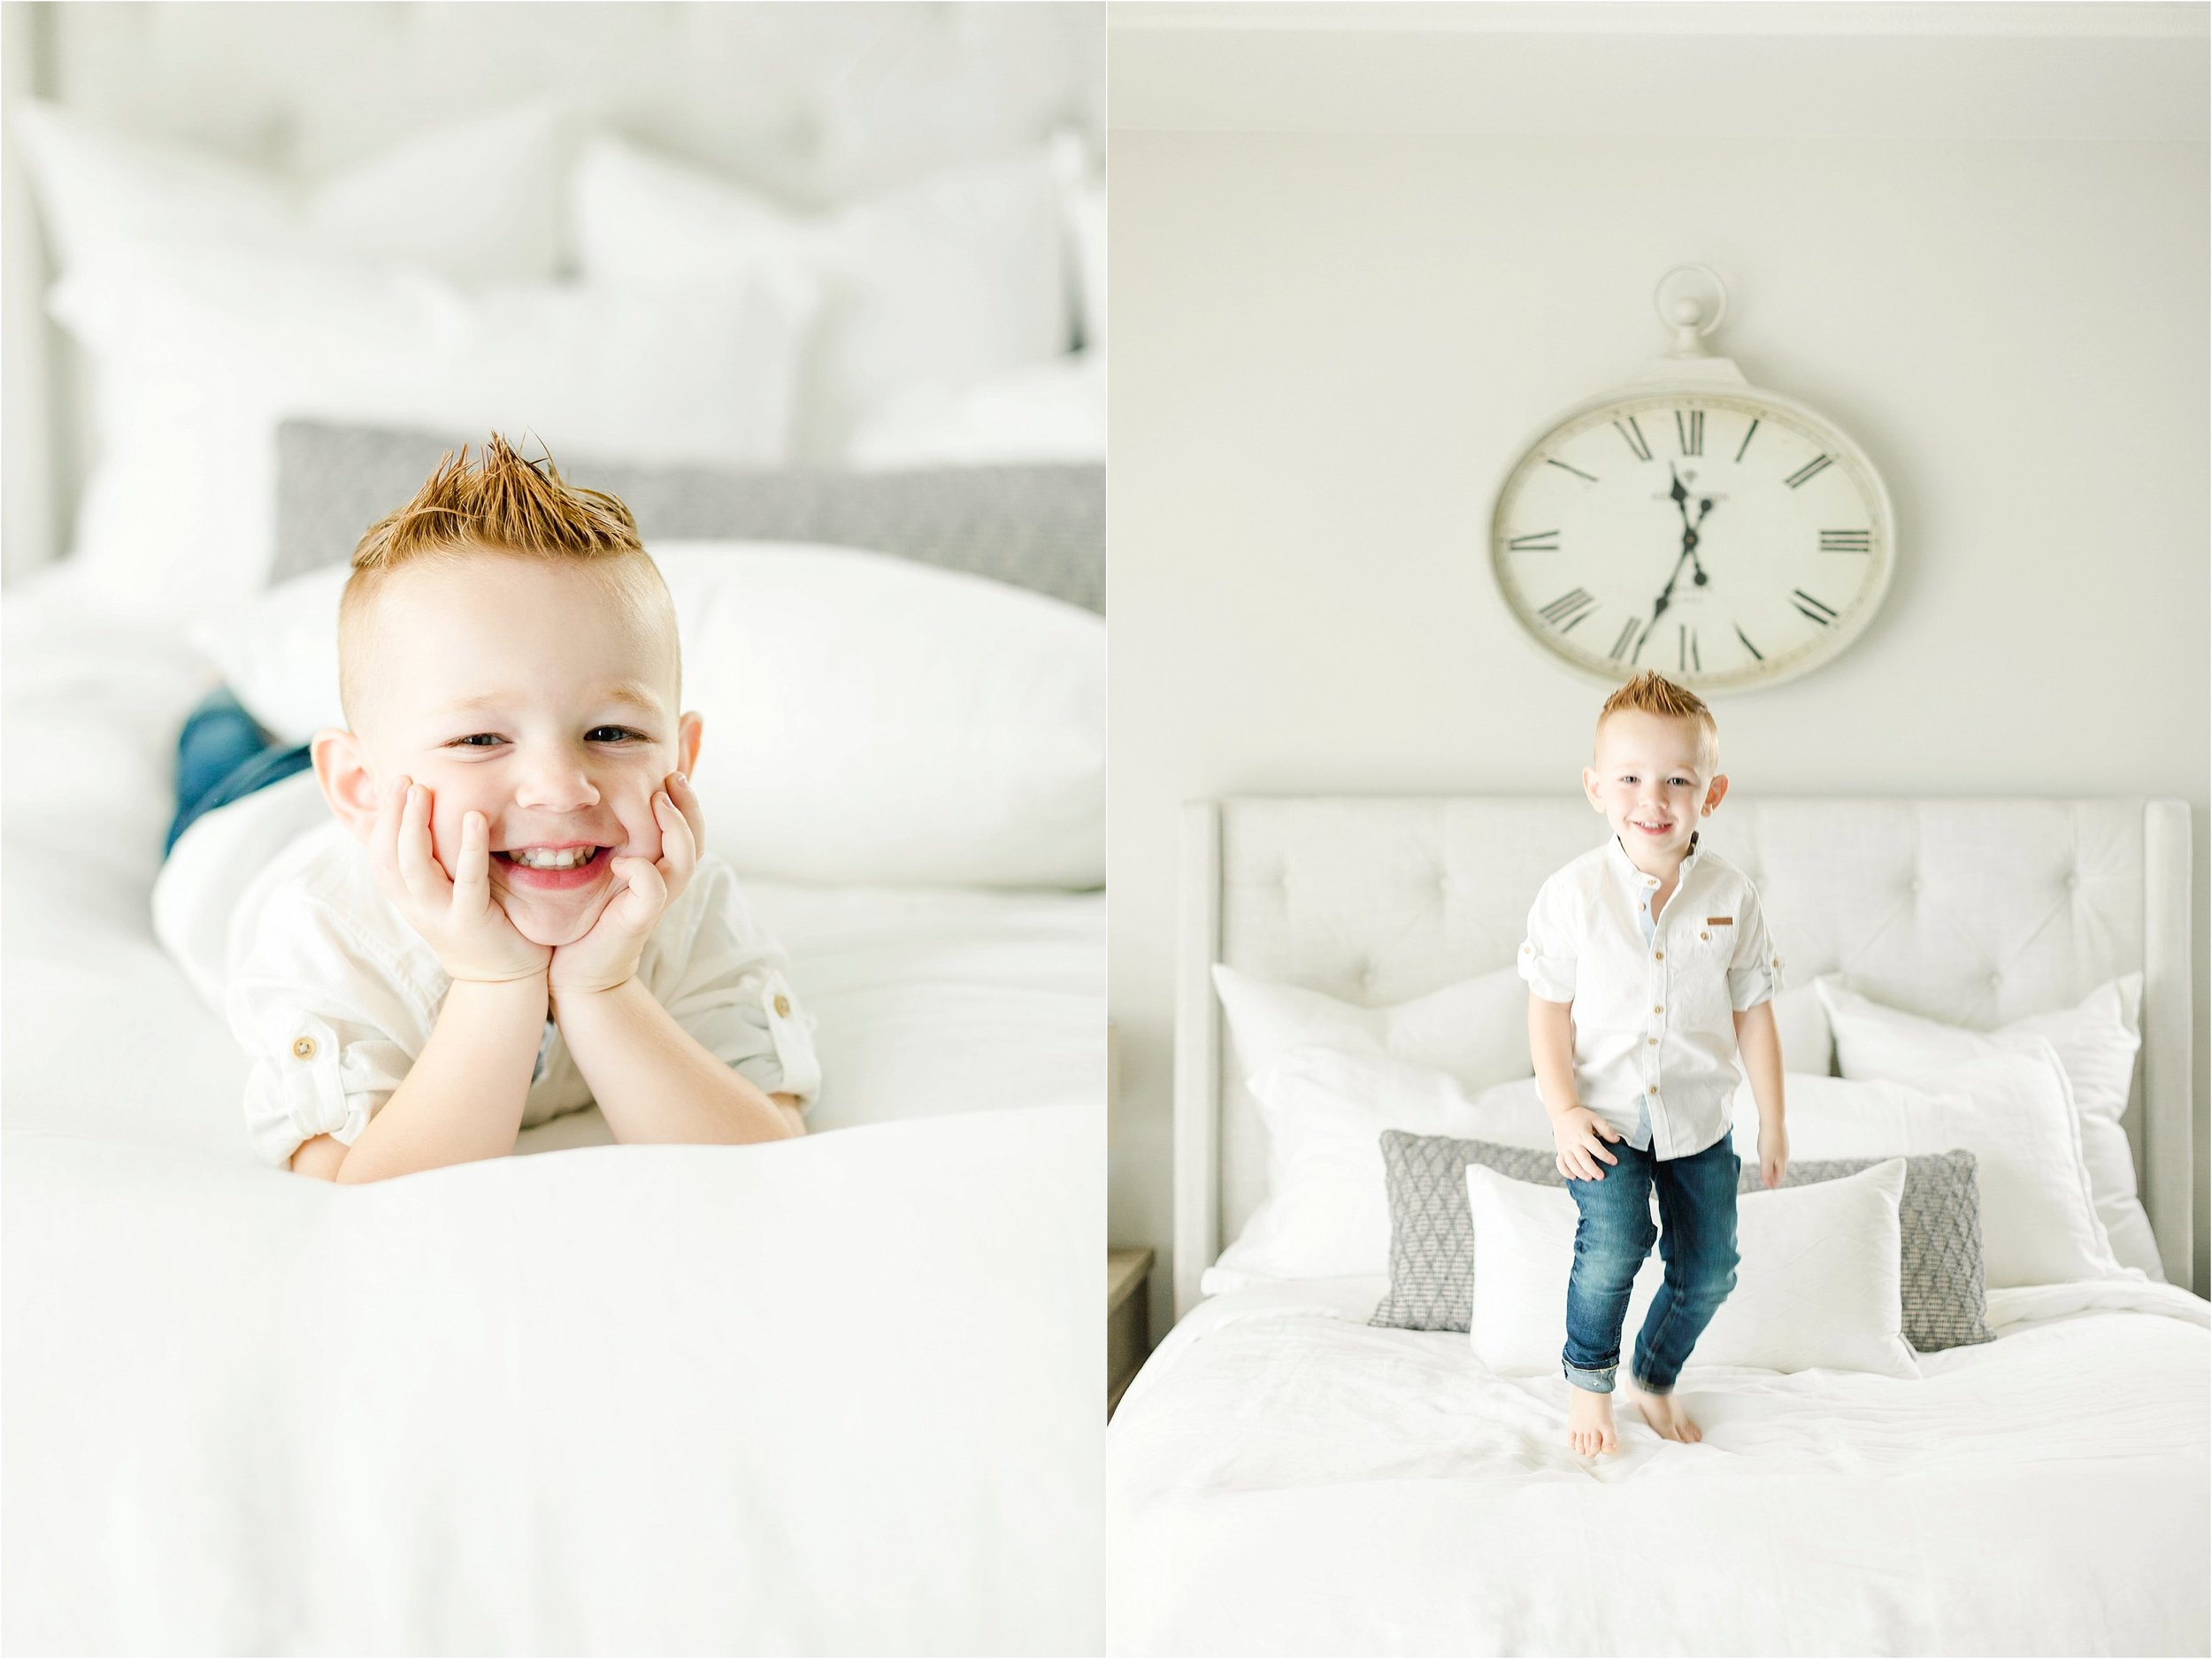 Image on the left shows older brother poseing on the bed with his head in his hands.  Image on the left shows older brother jumping on the bed.